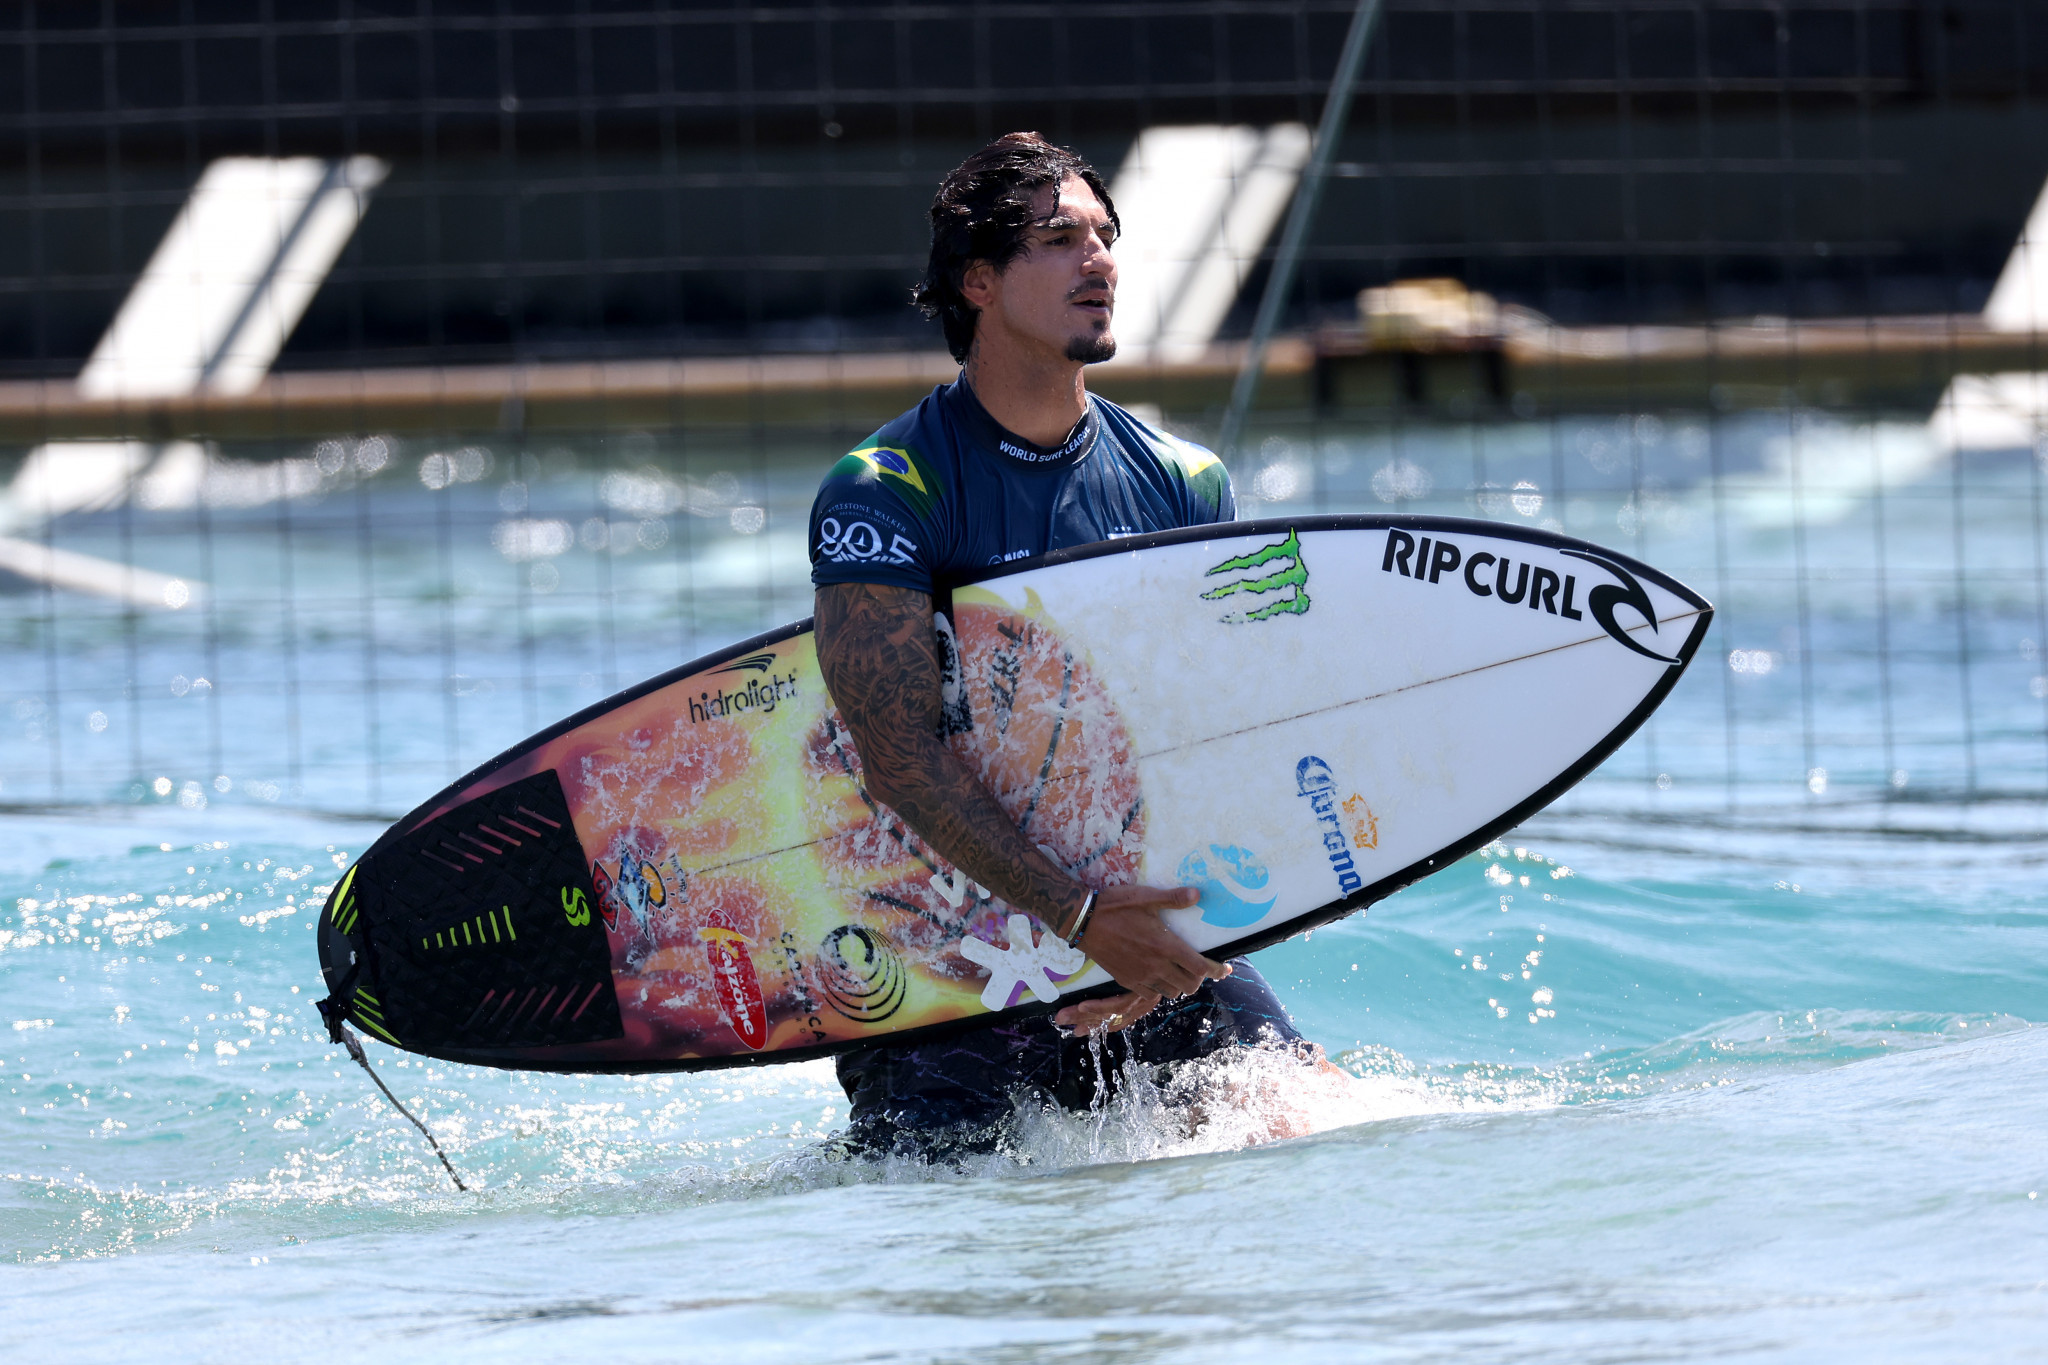 Medina stars again as men's round two begins at World Surfing Games